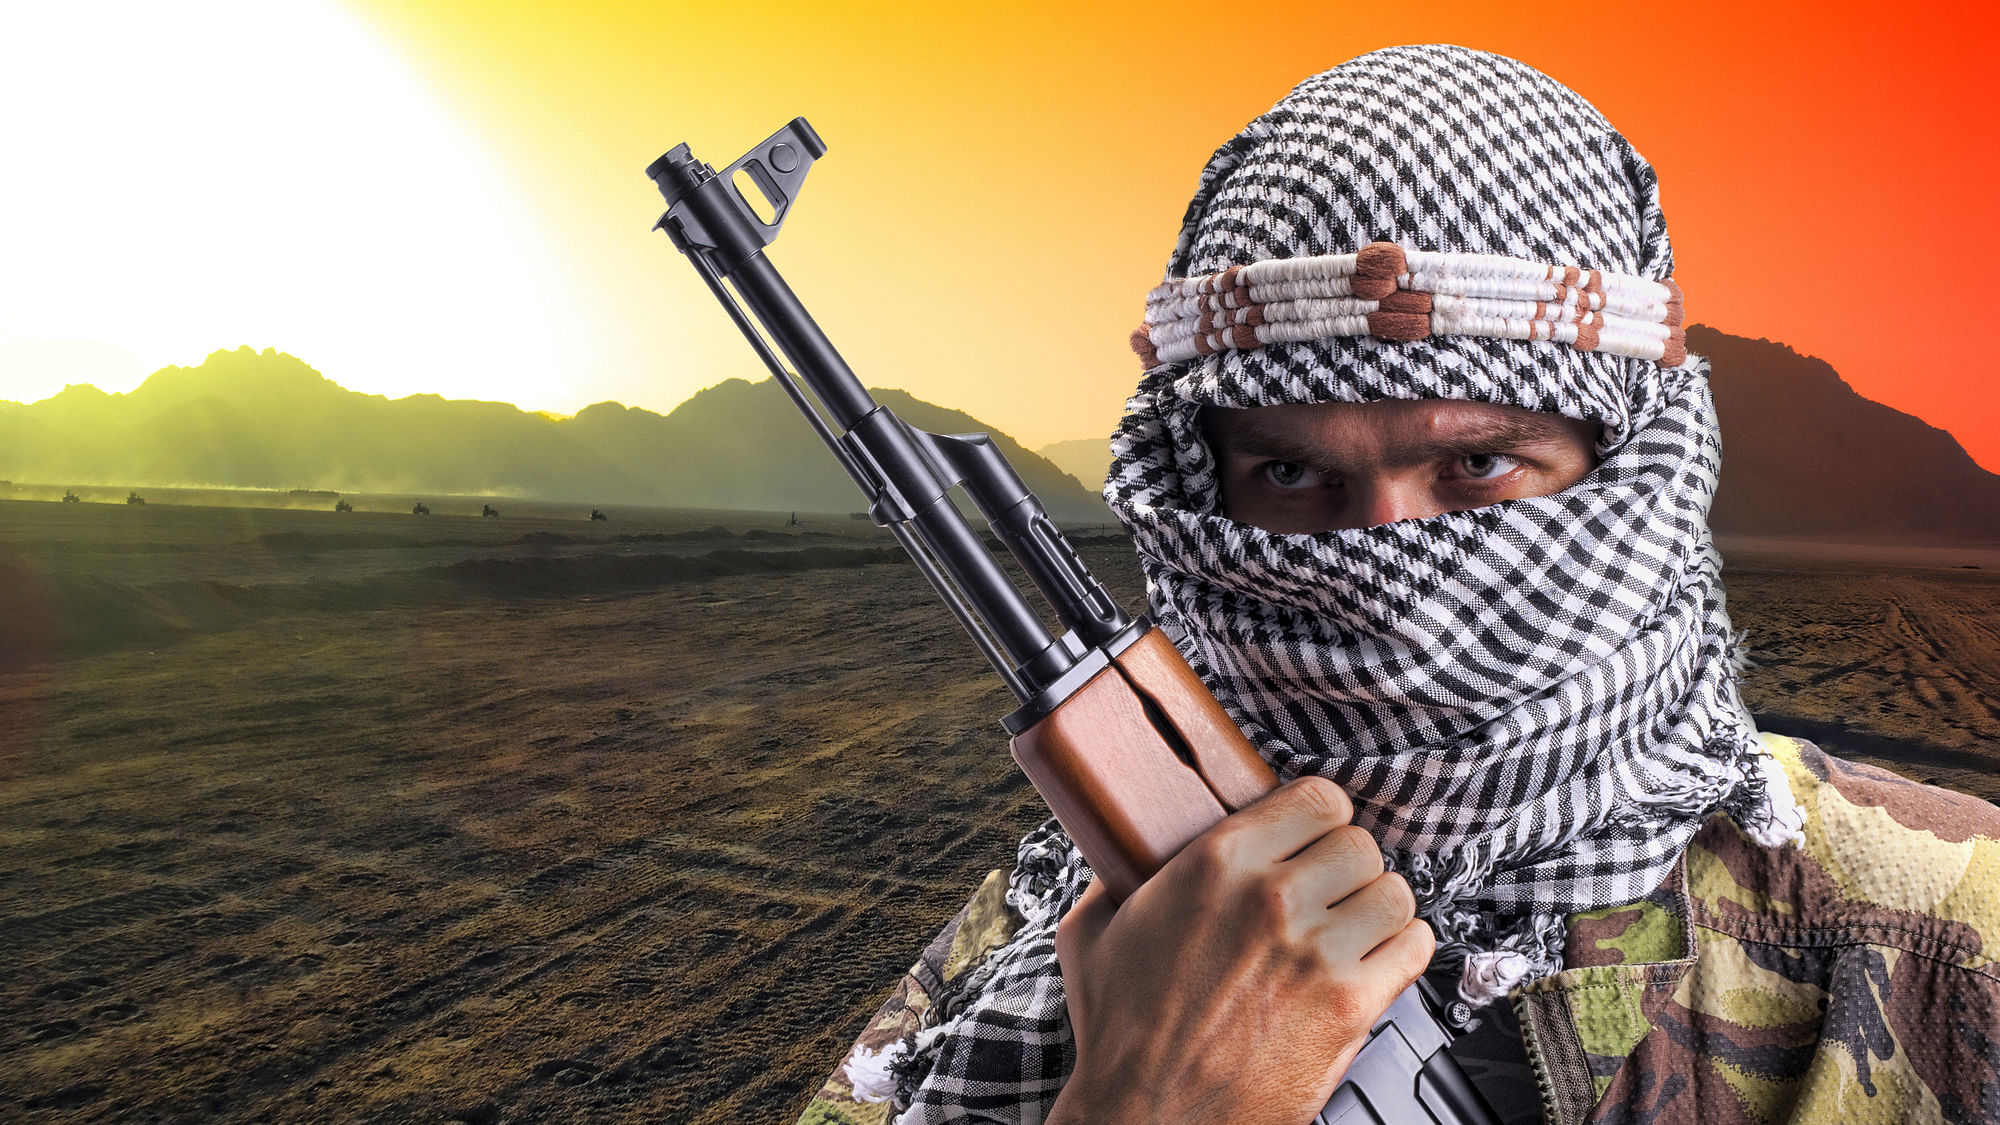 The call was made by al Qaeda in the Indian Subcontinent (AQIS).  (Photo: iStockPhoto)